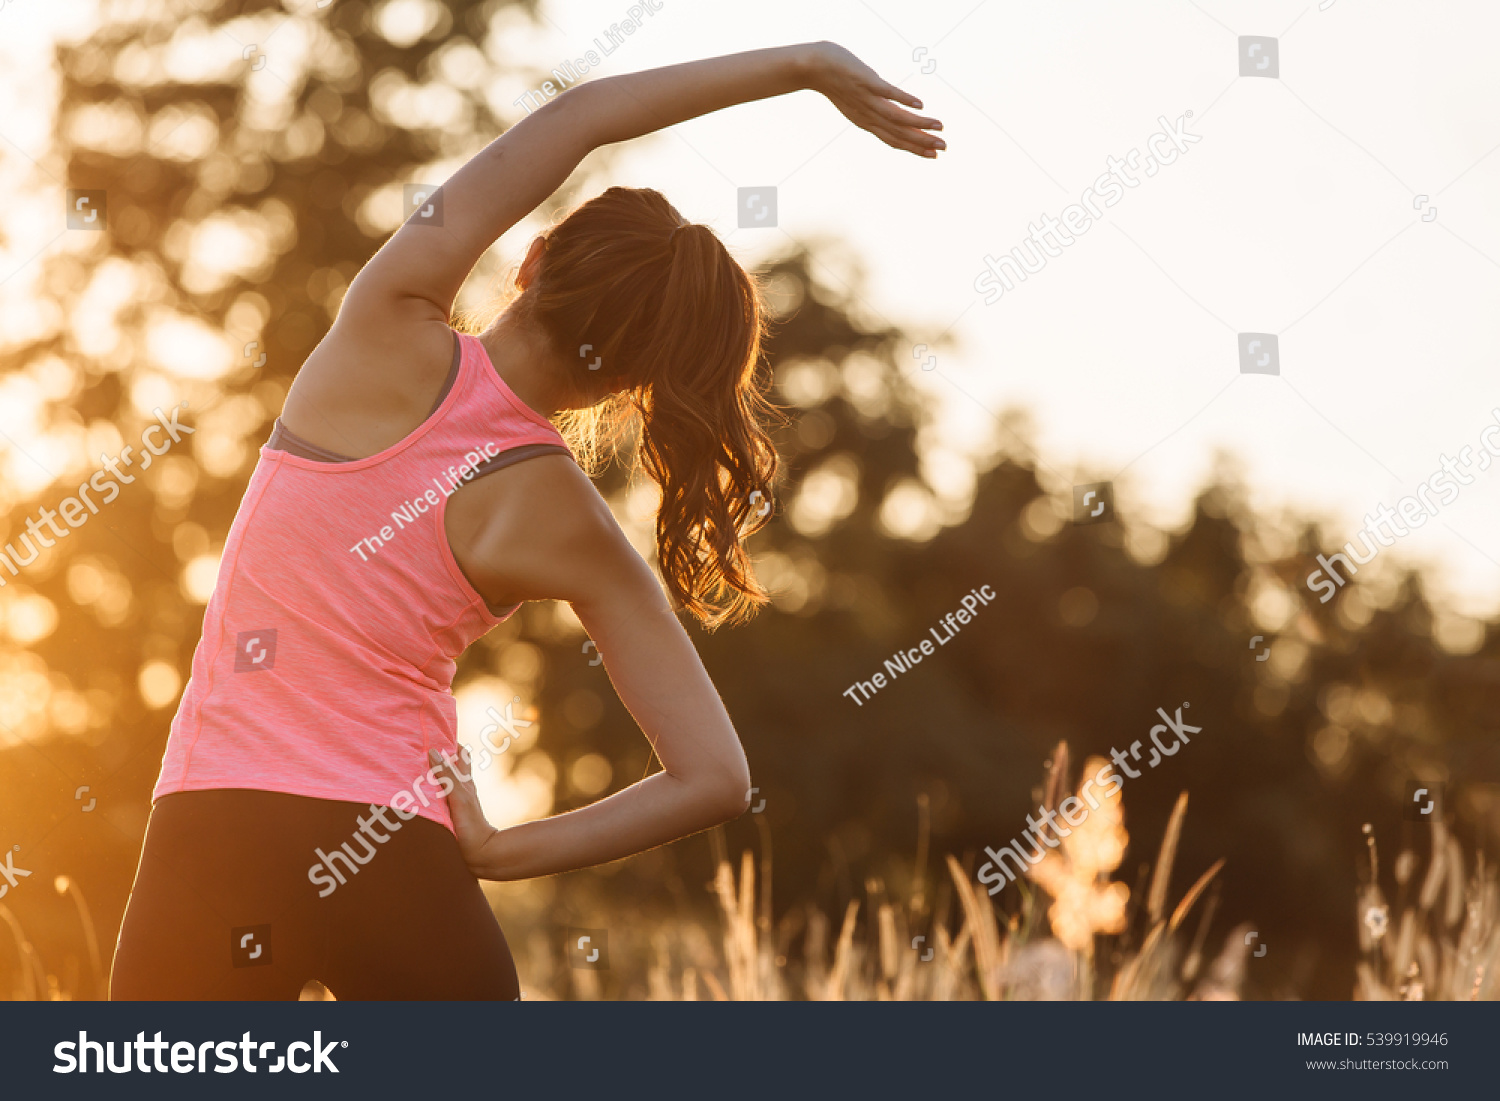 Young female workout before fitness training session at the park. Healthy young woman warming up outdoors. She is stretching her arms and looking away,hi key. #539919946